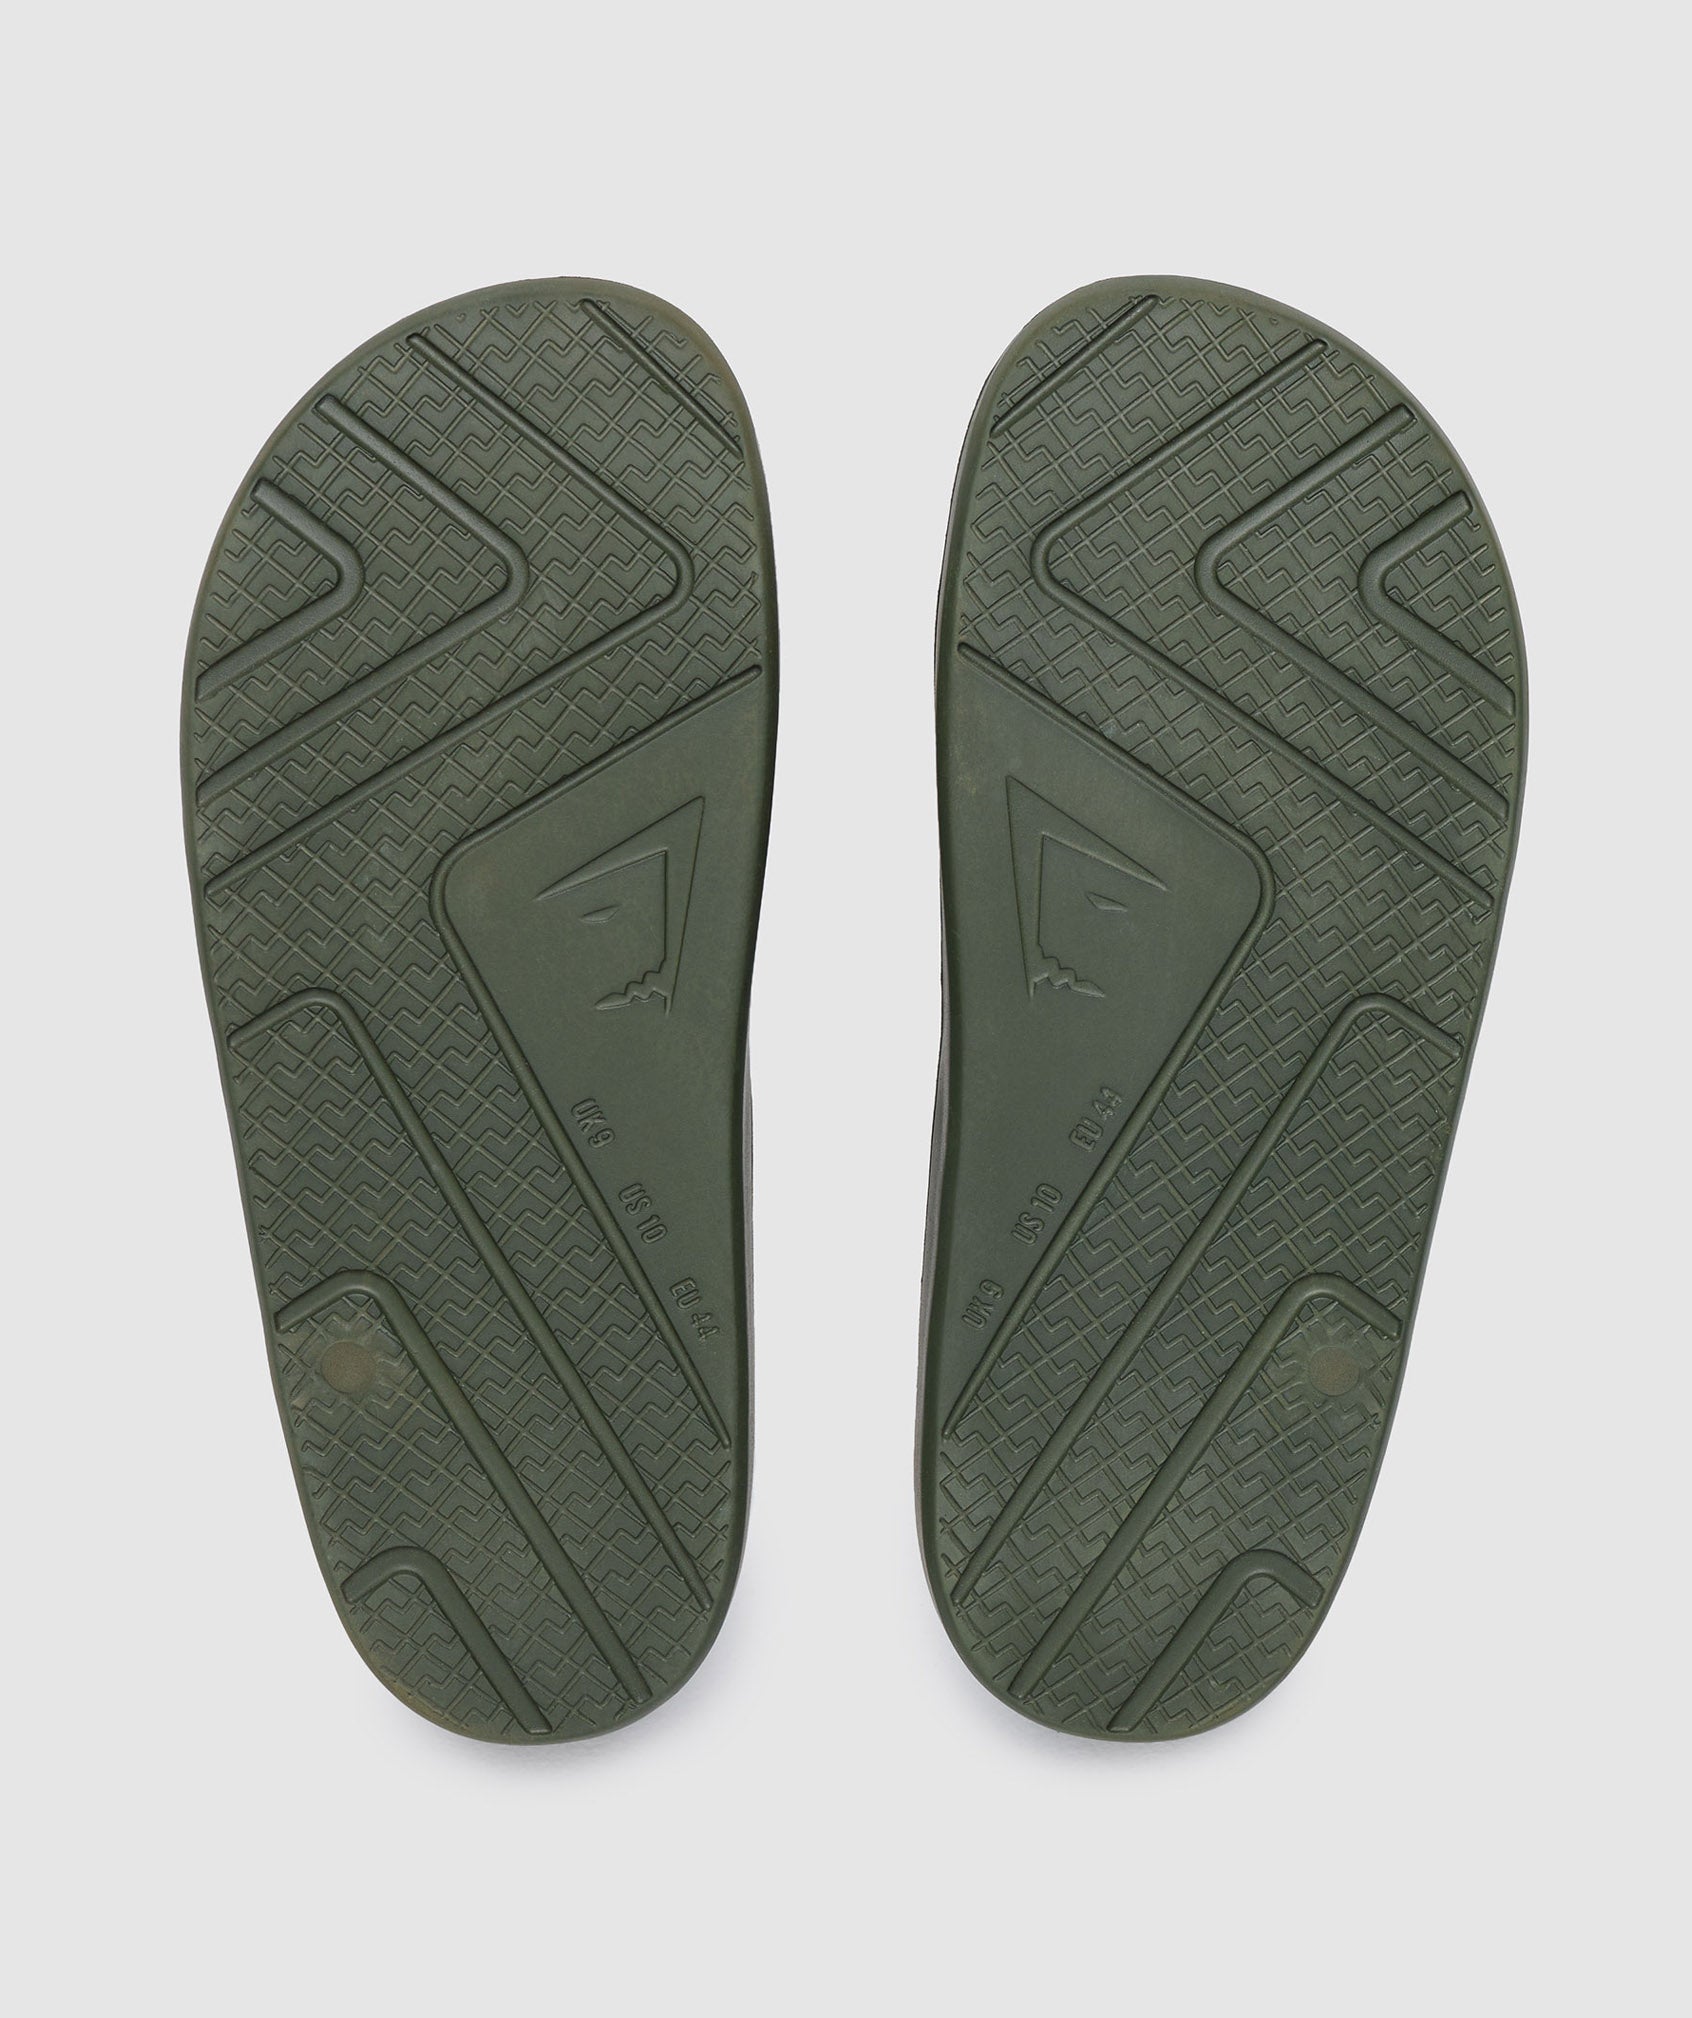 Rest Day Slides in Core Olive